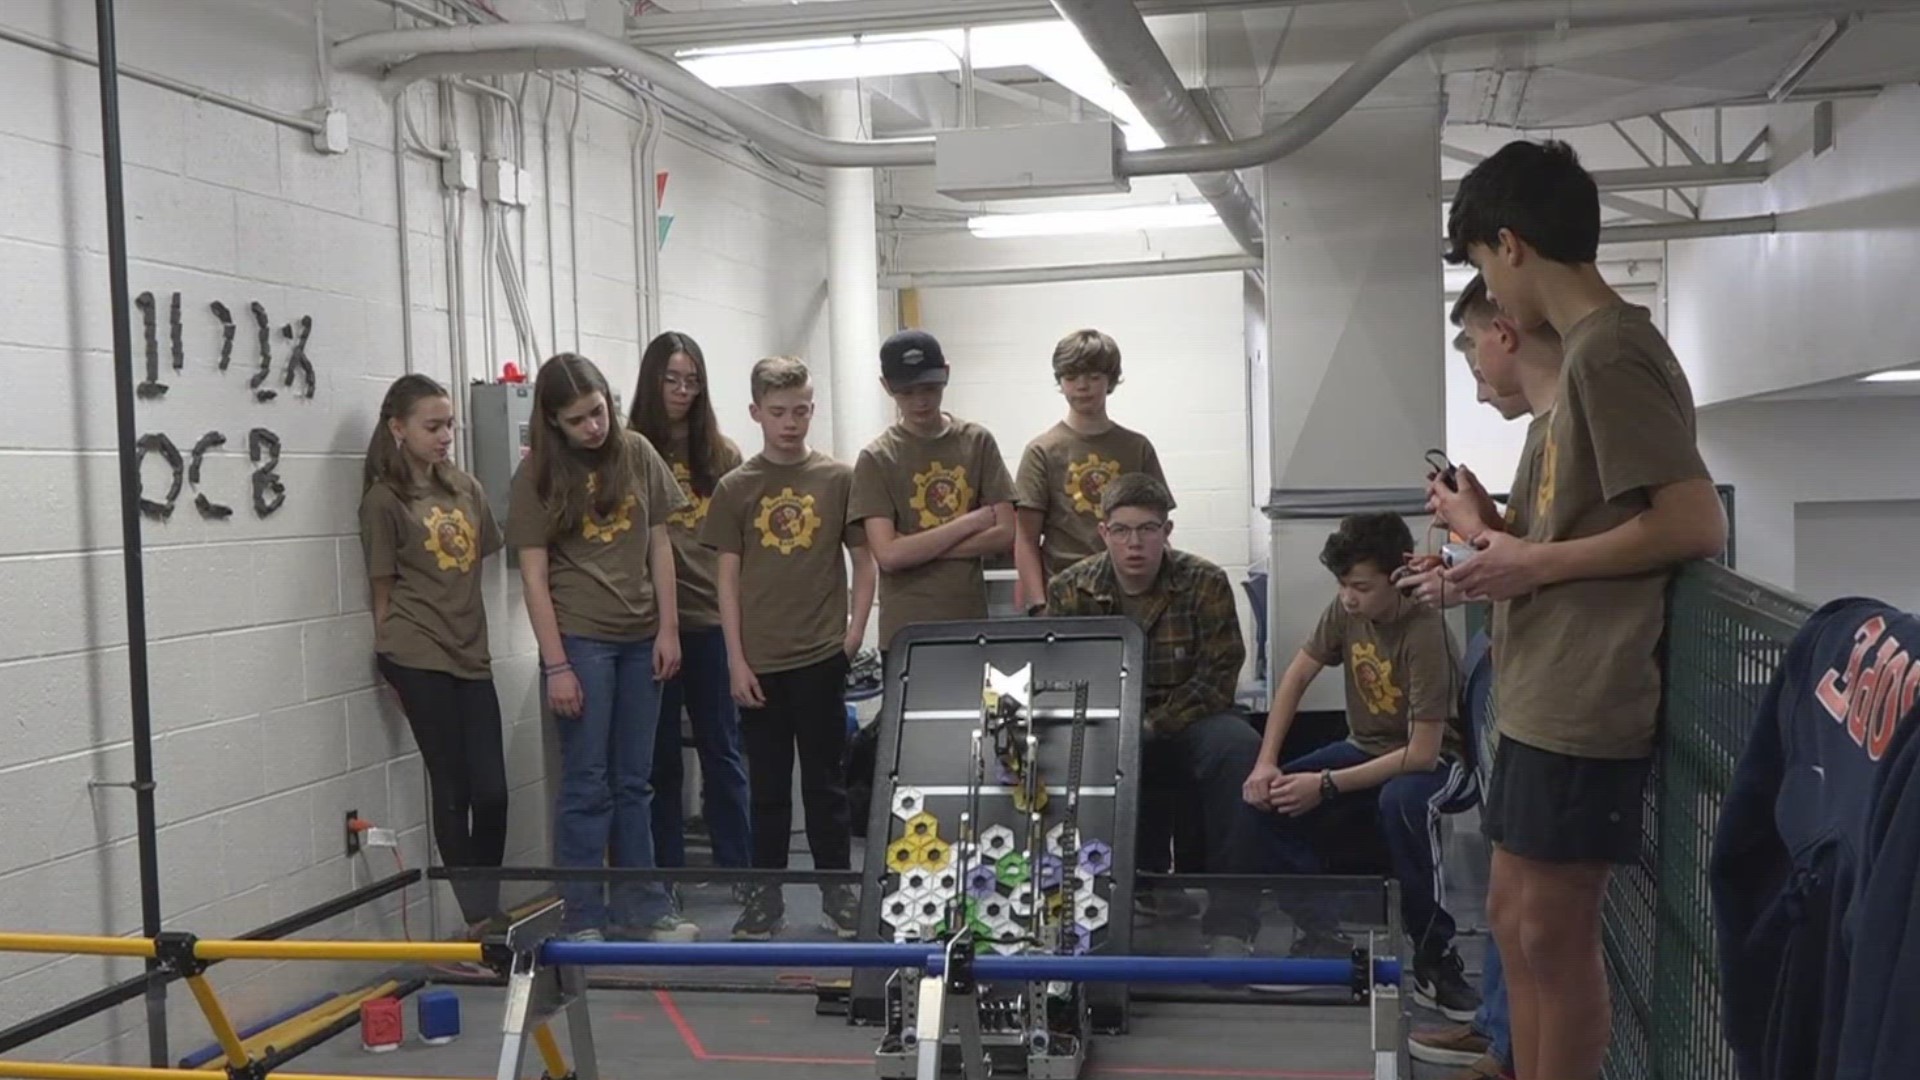 The "OverClucked Bots" is one of only five from Michigan heading to the big competition in Houston.